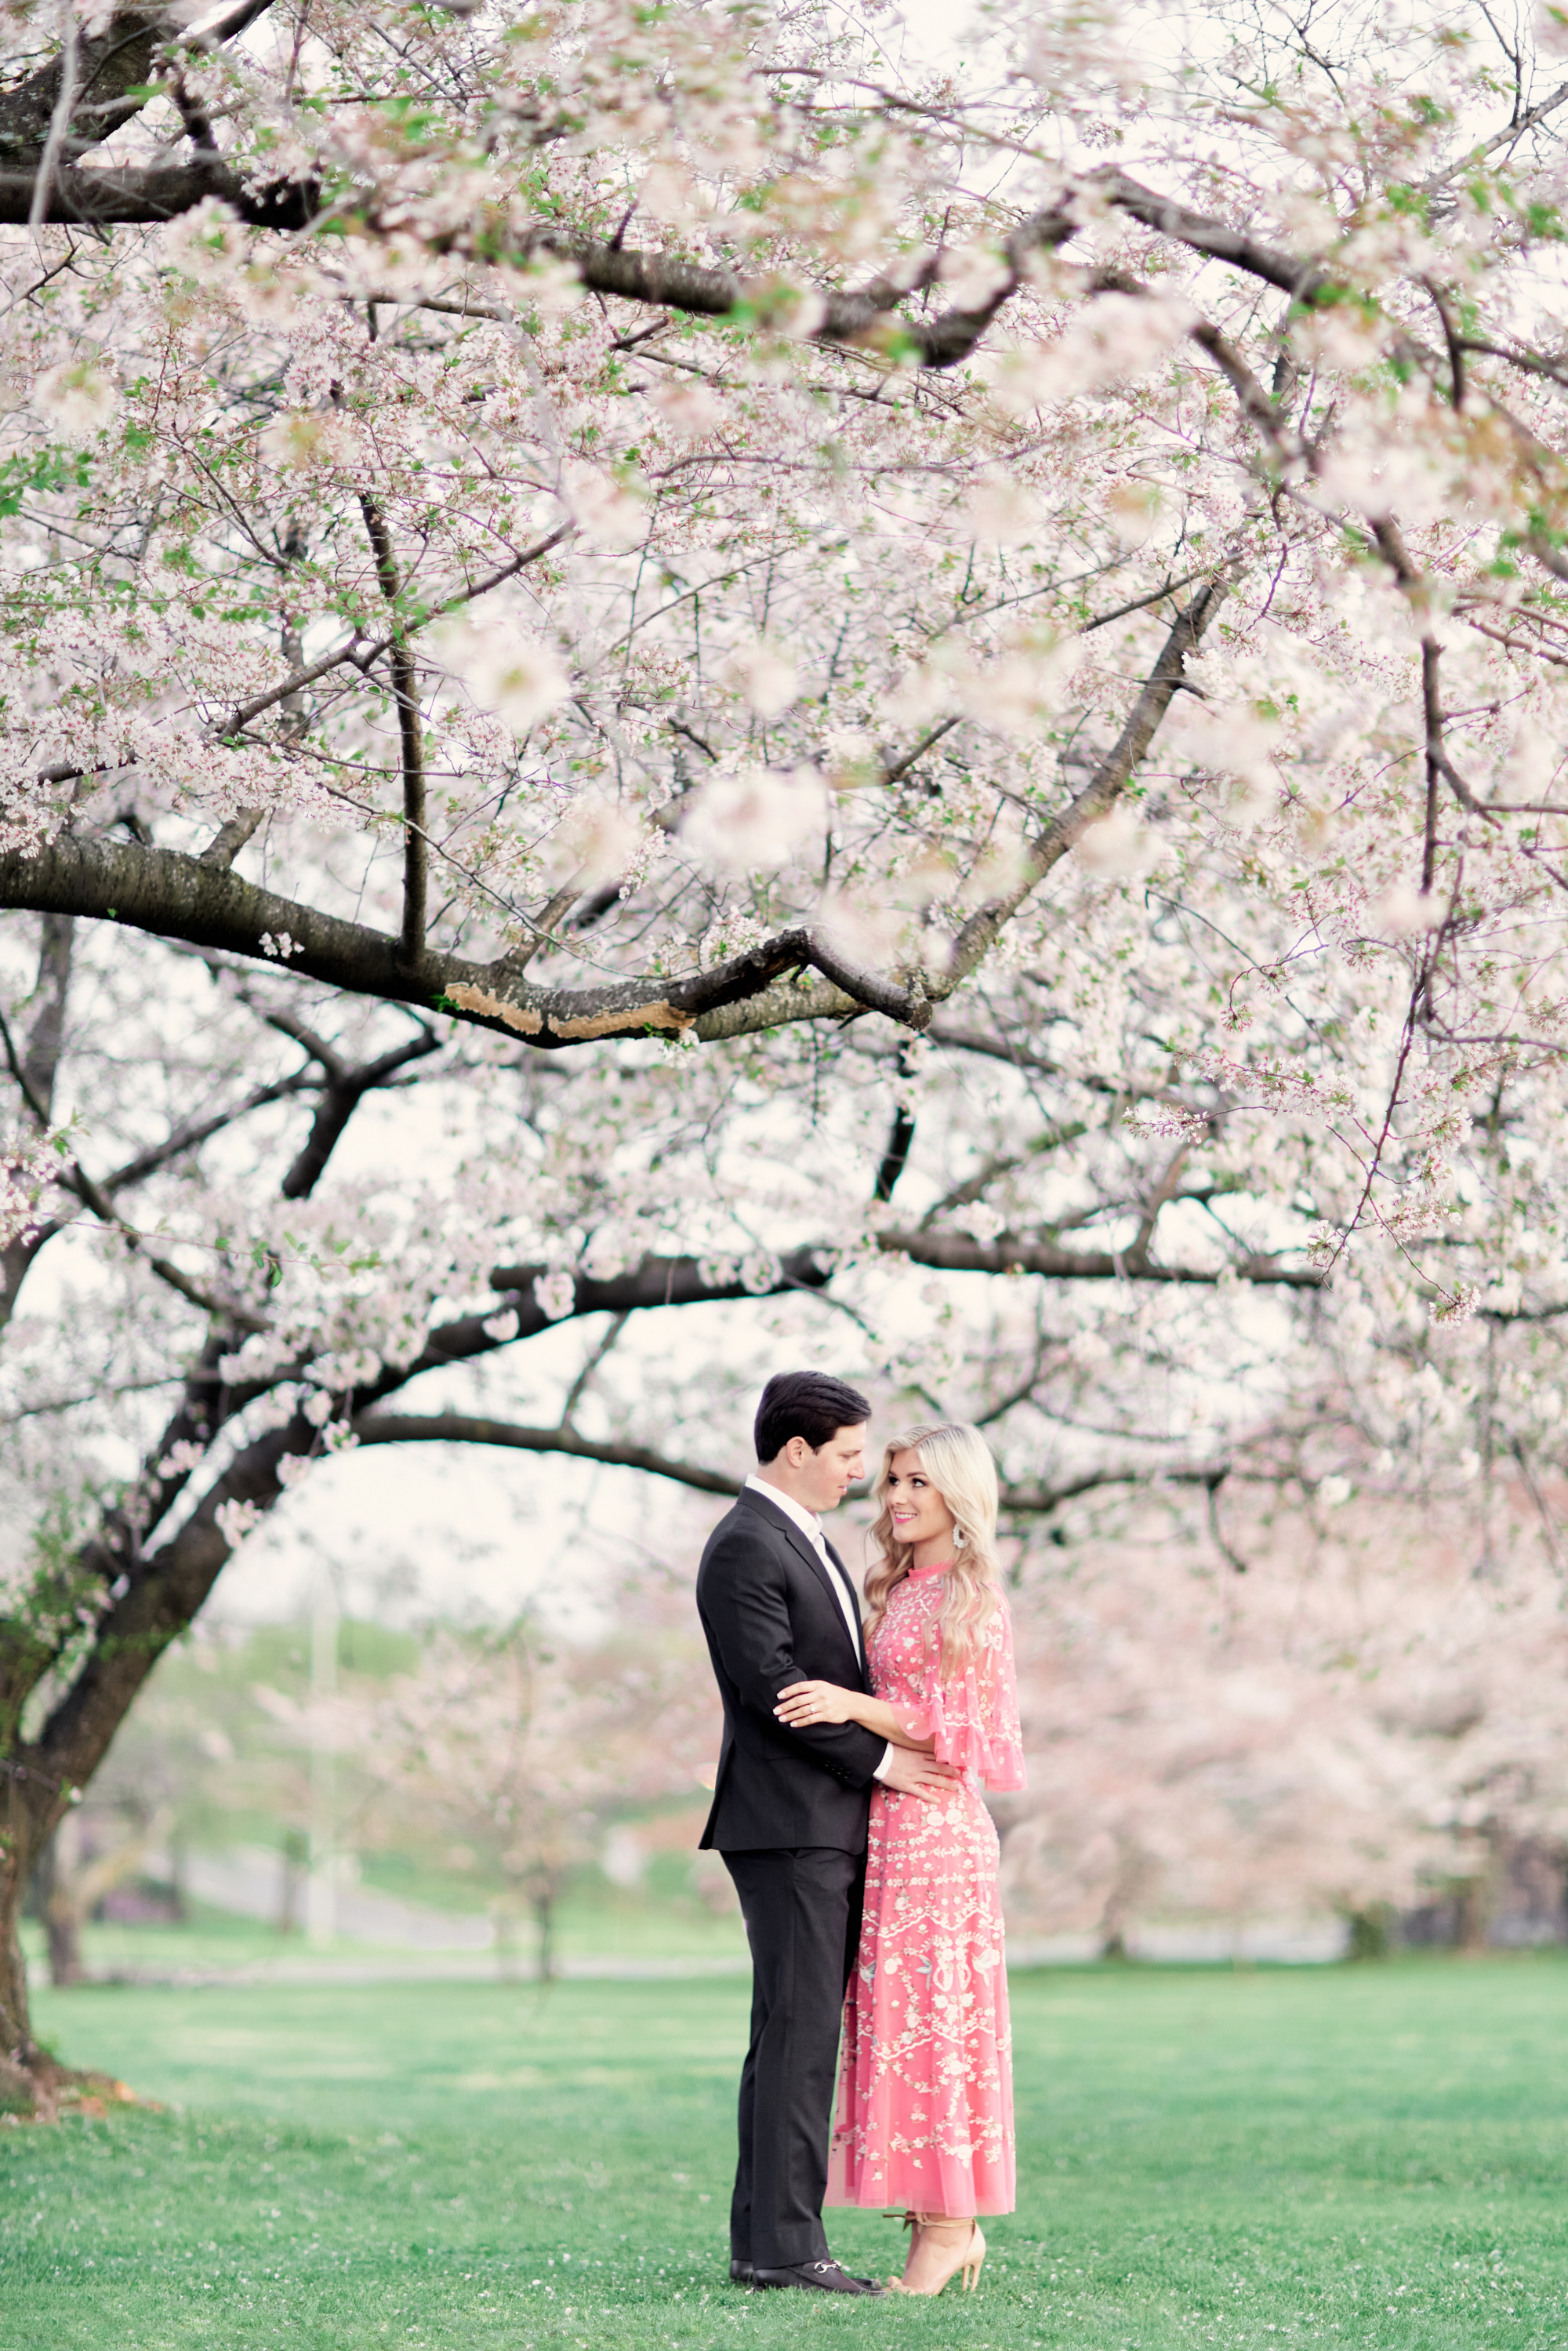 Cherry blossoms dating site in Qiqihar